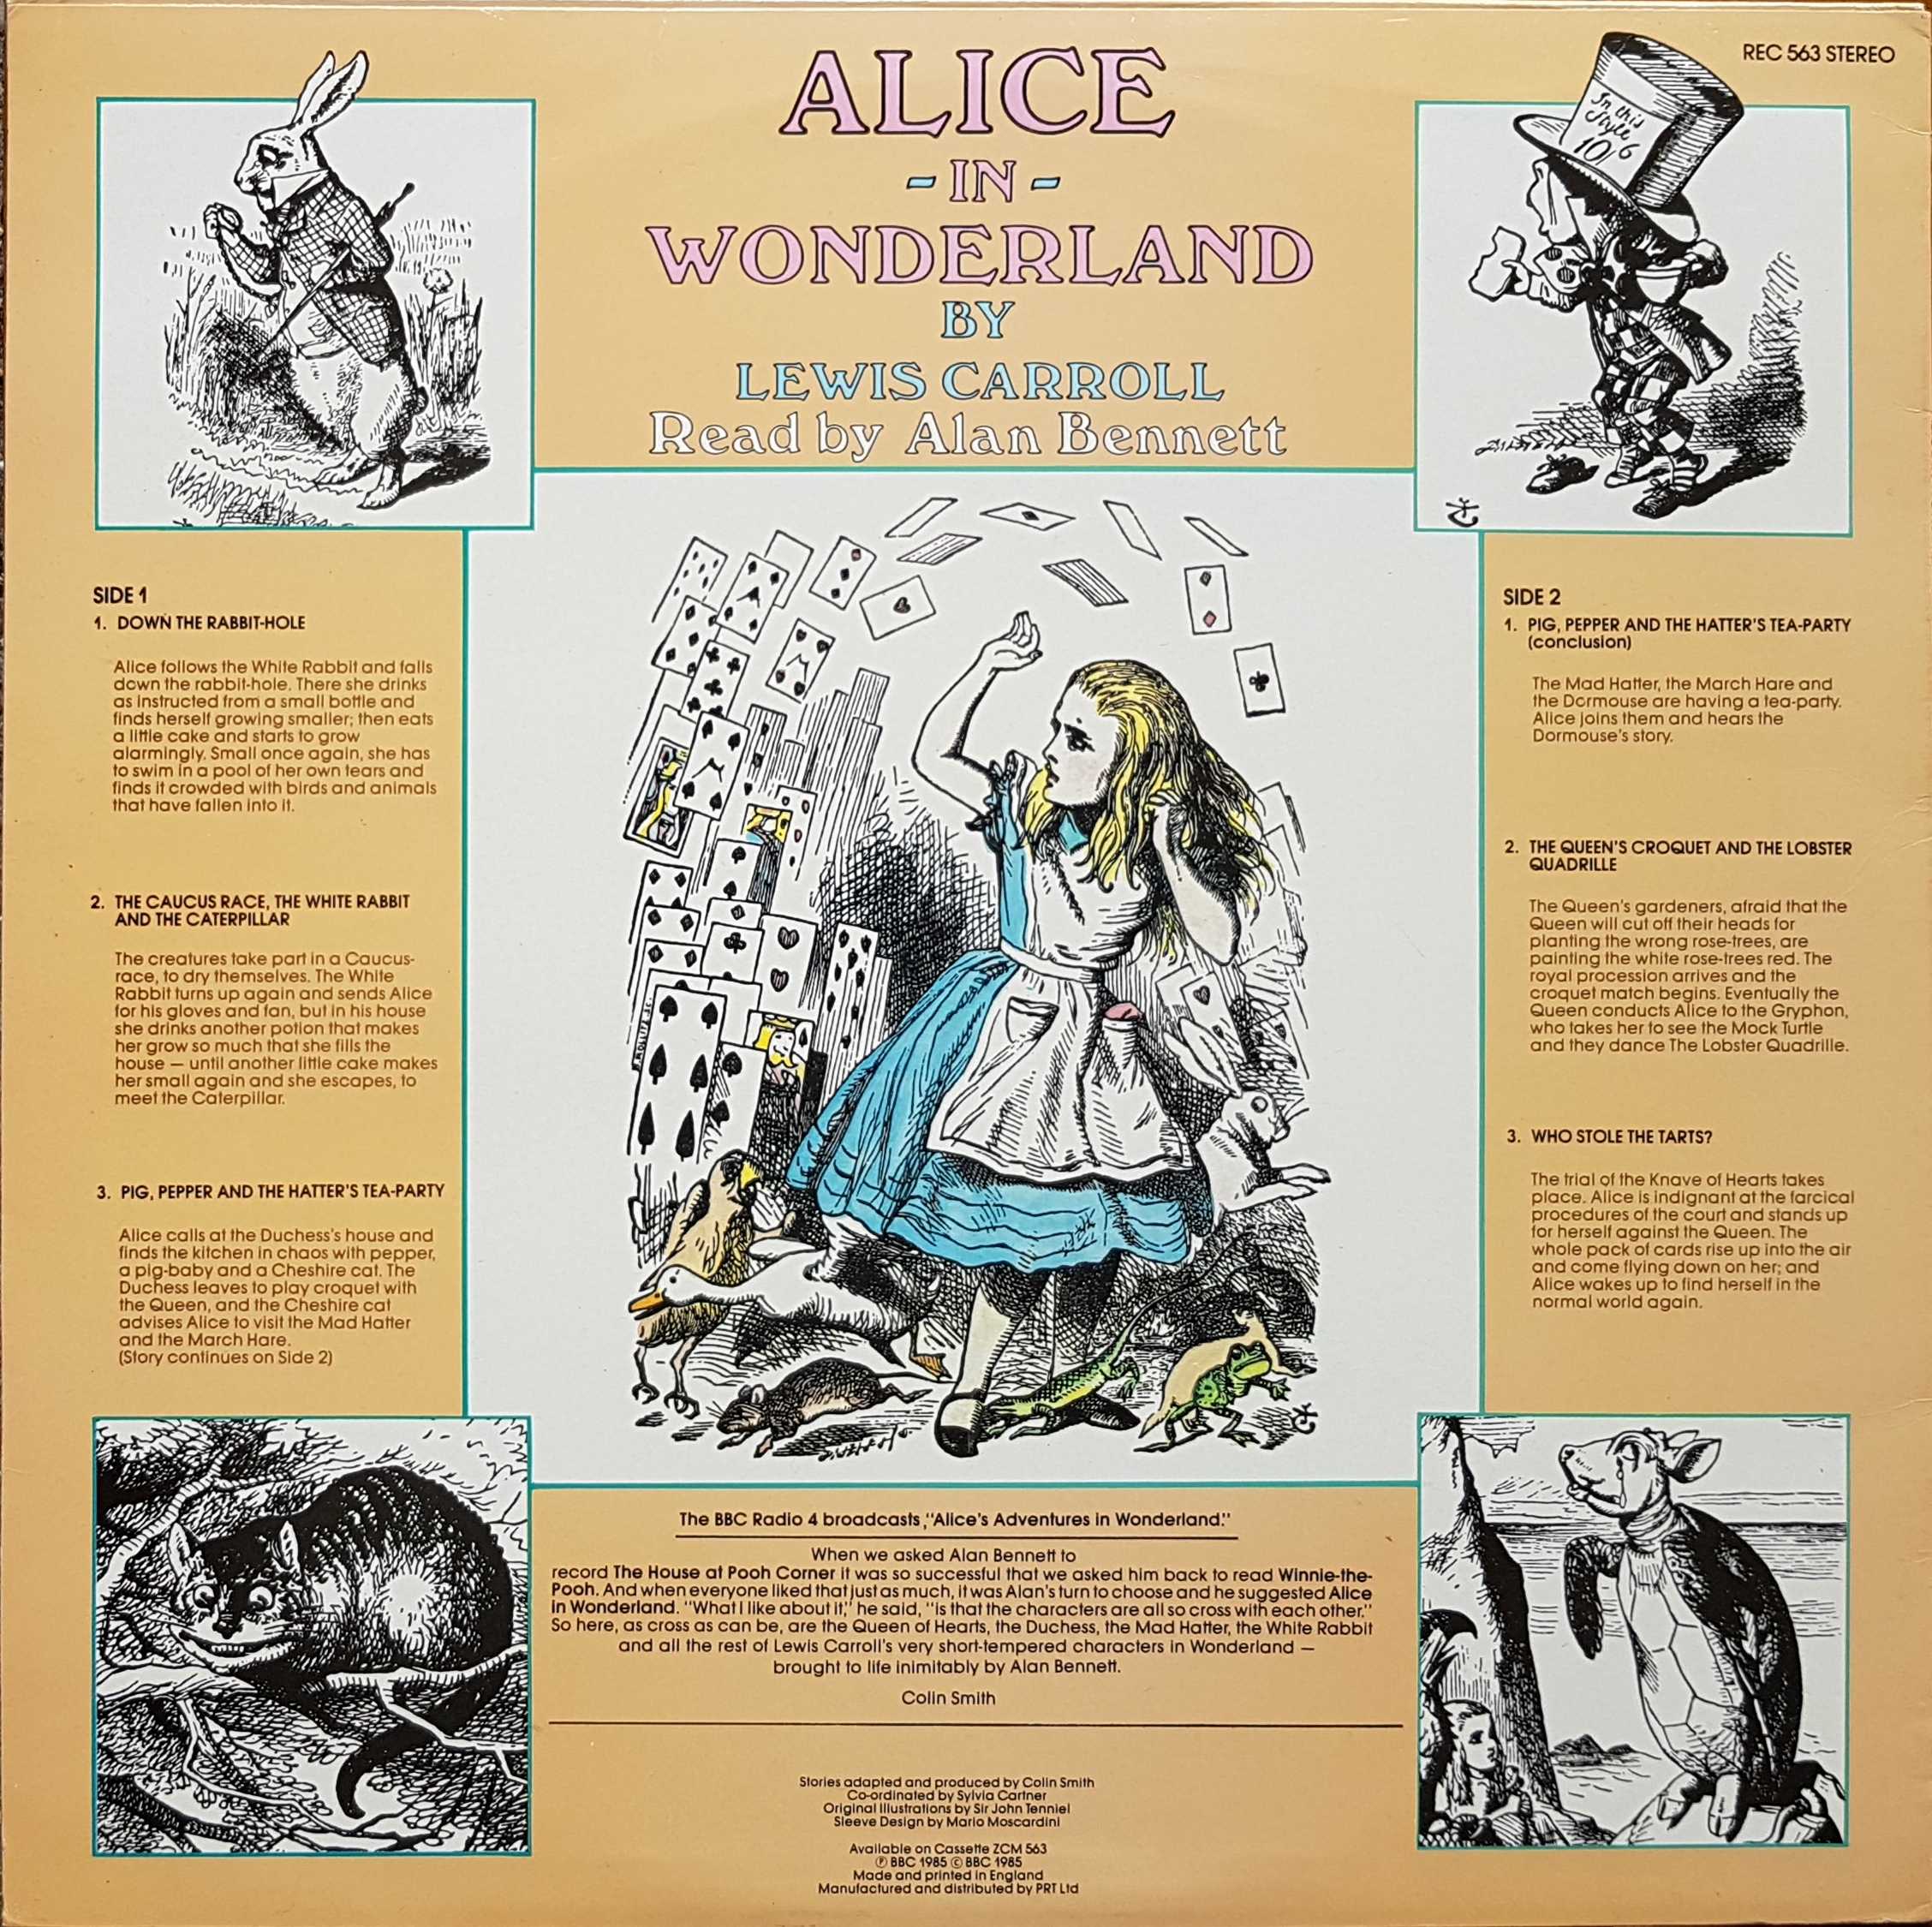 Picture of REC 563 Alice in Wonderland by artist Lewis Carroll / Alan Bennett from the BBC records and Tapes library